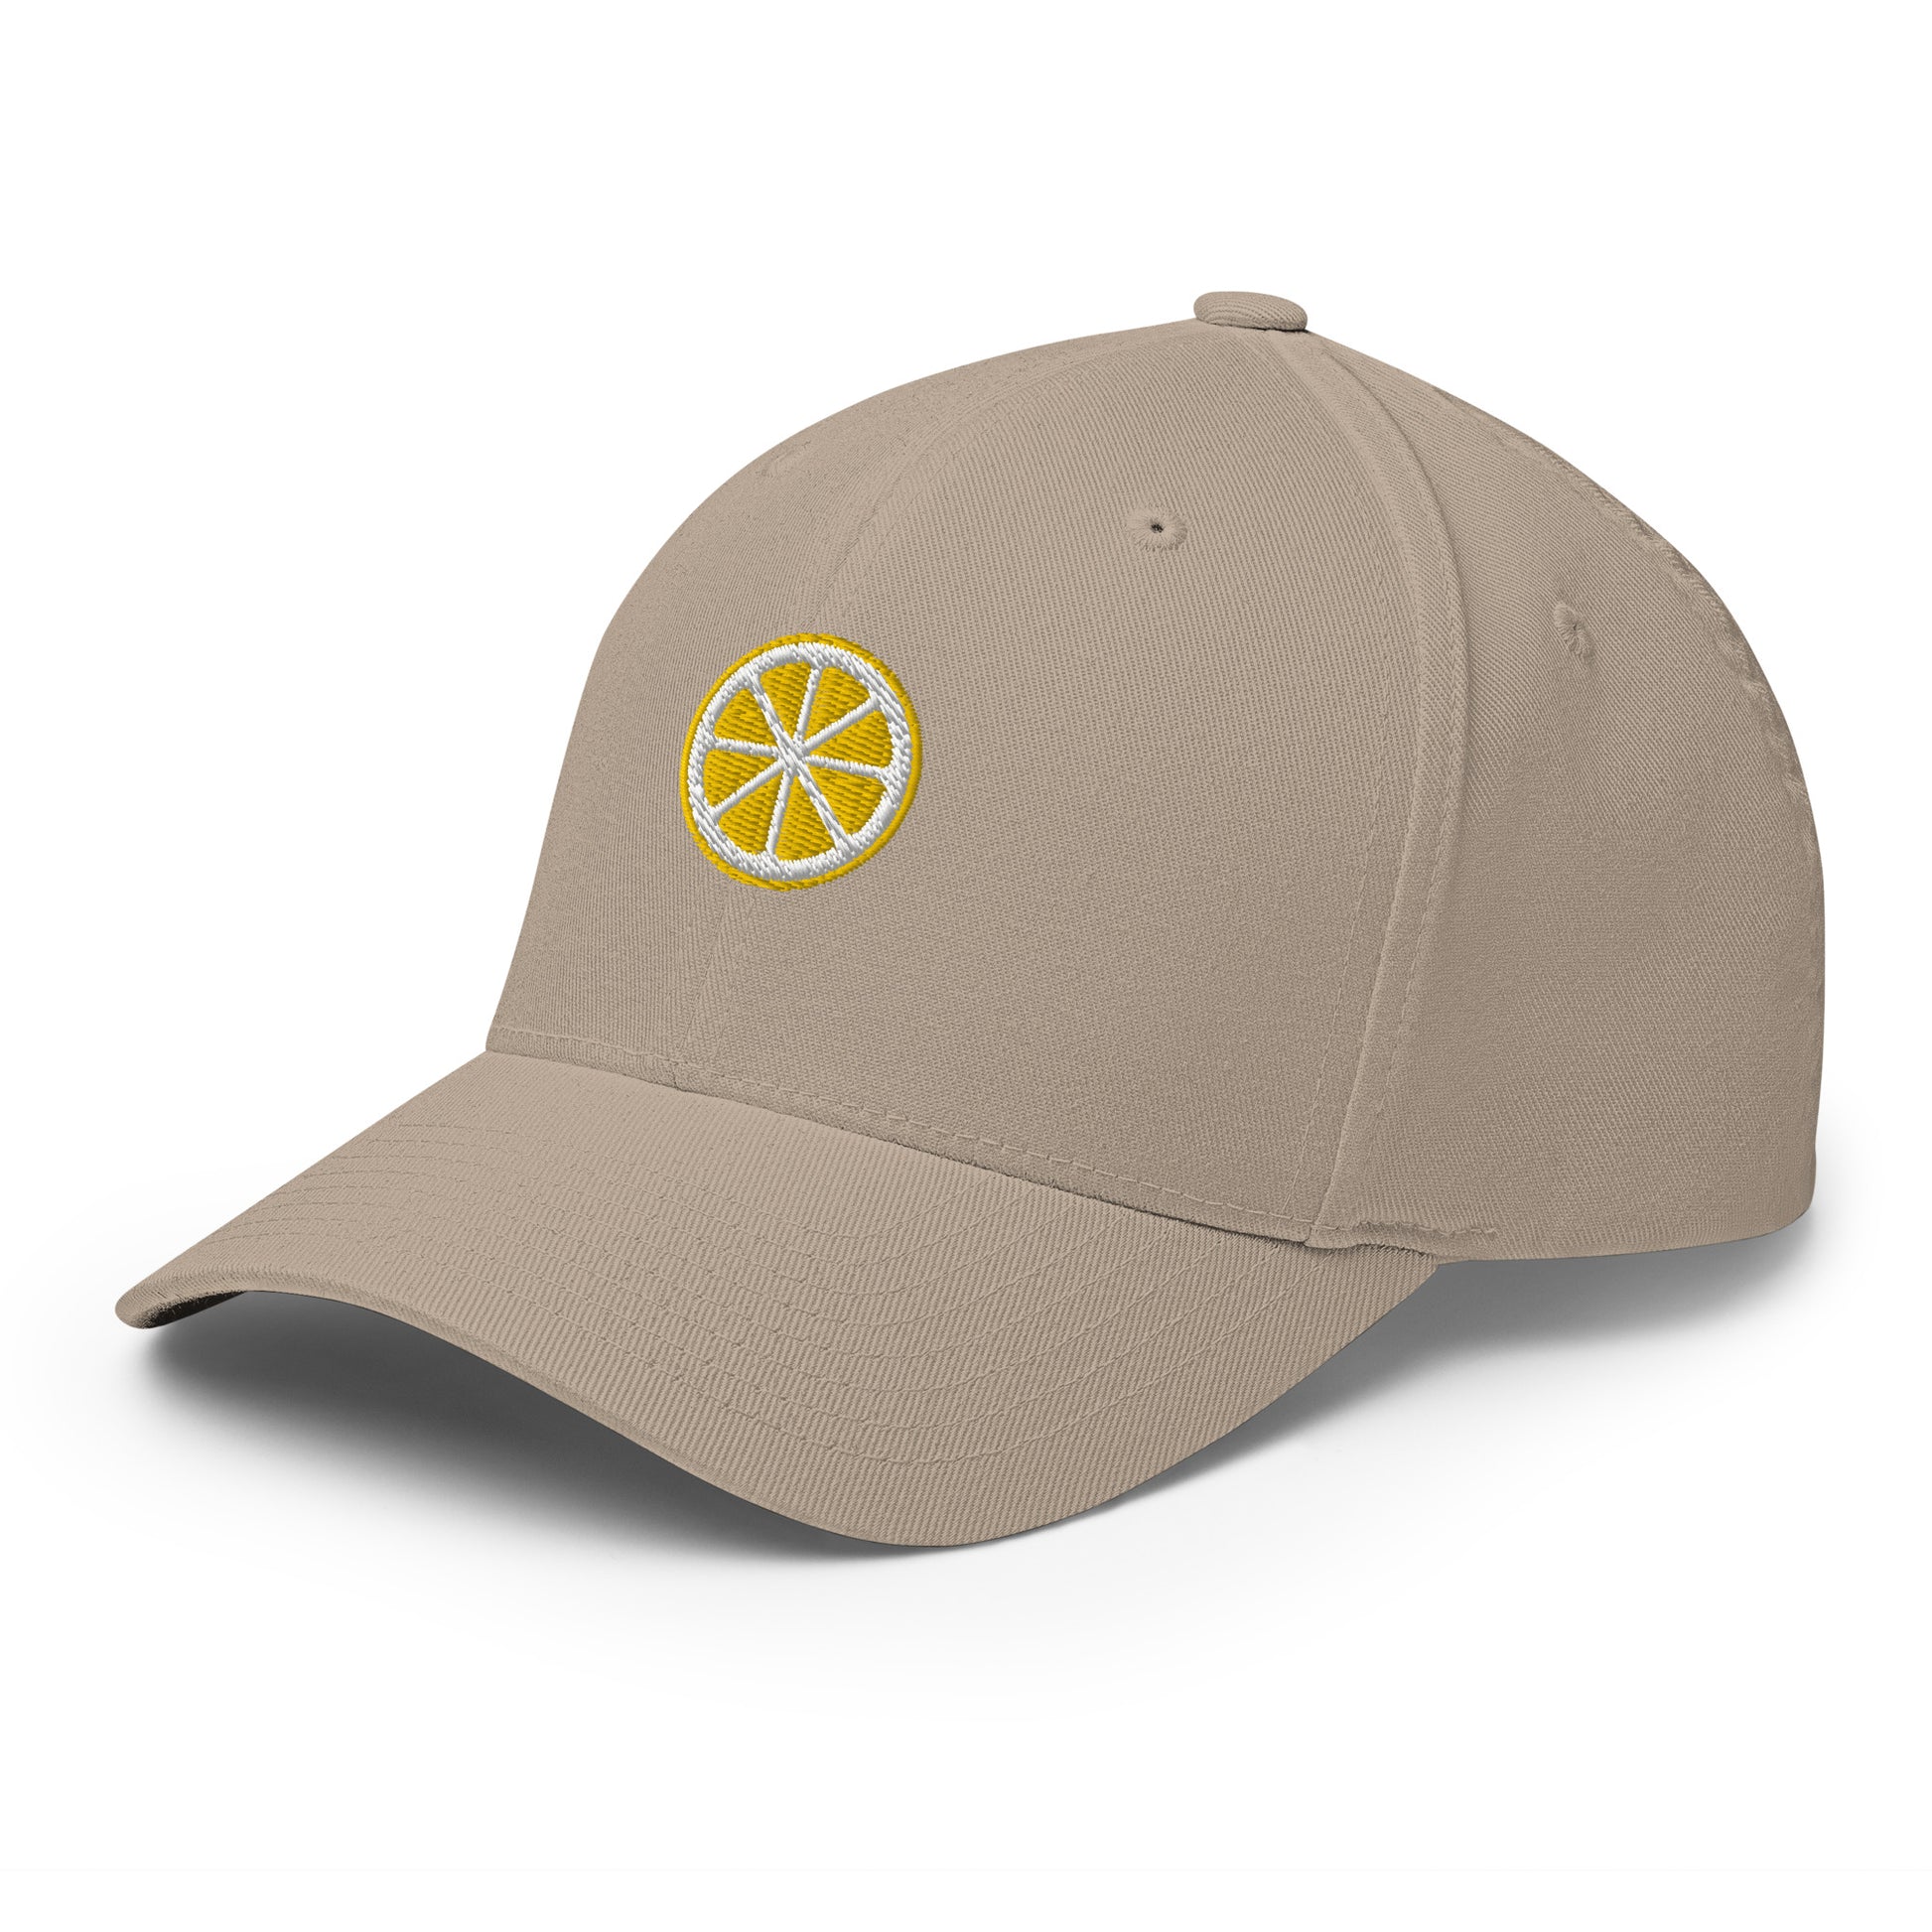 cap-from-the-front-with-lemon-symbol